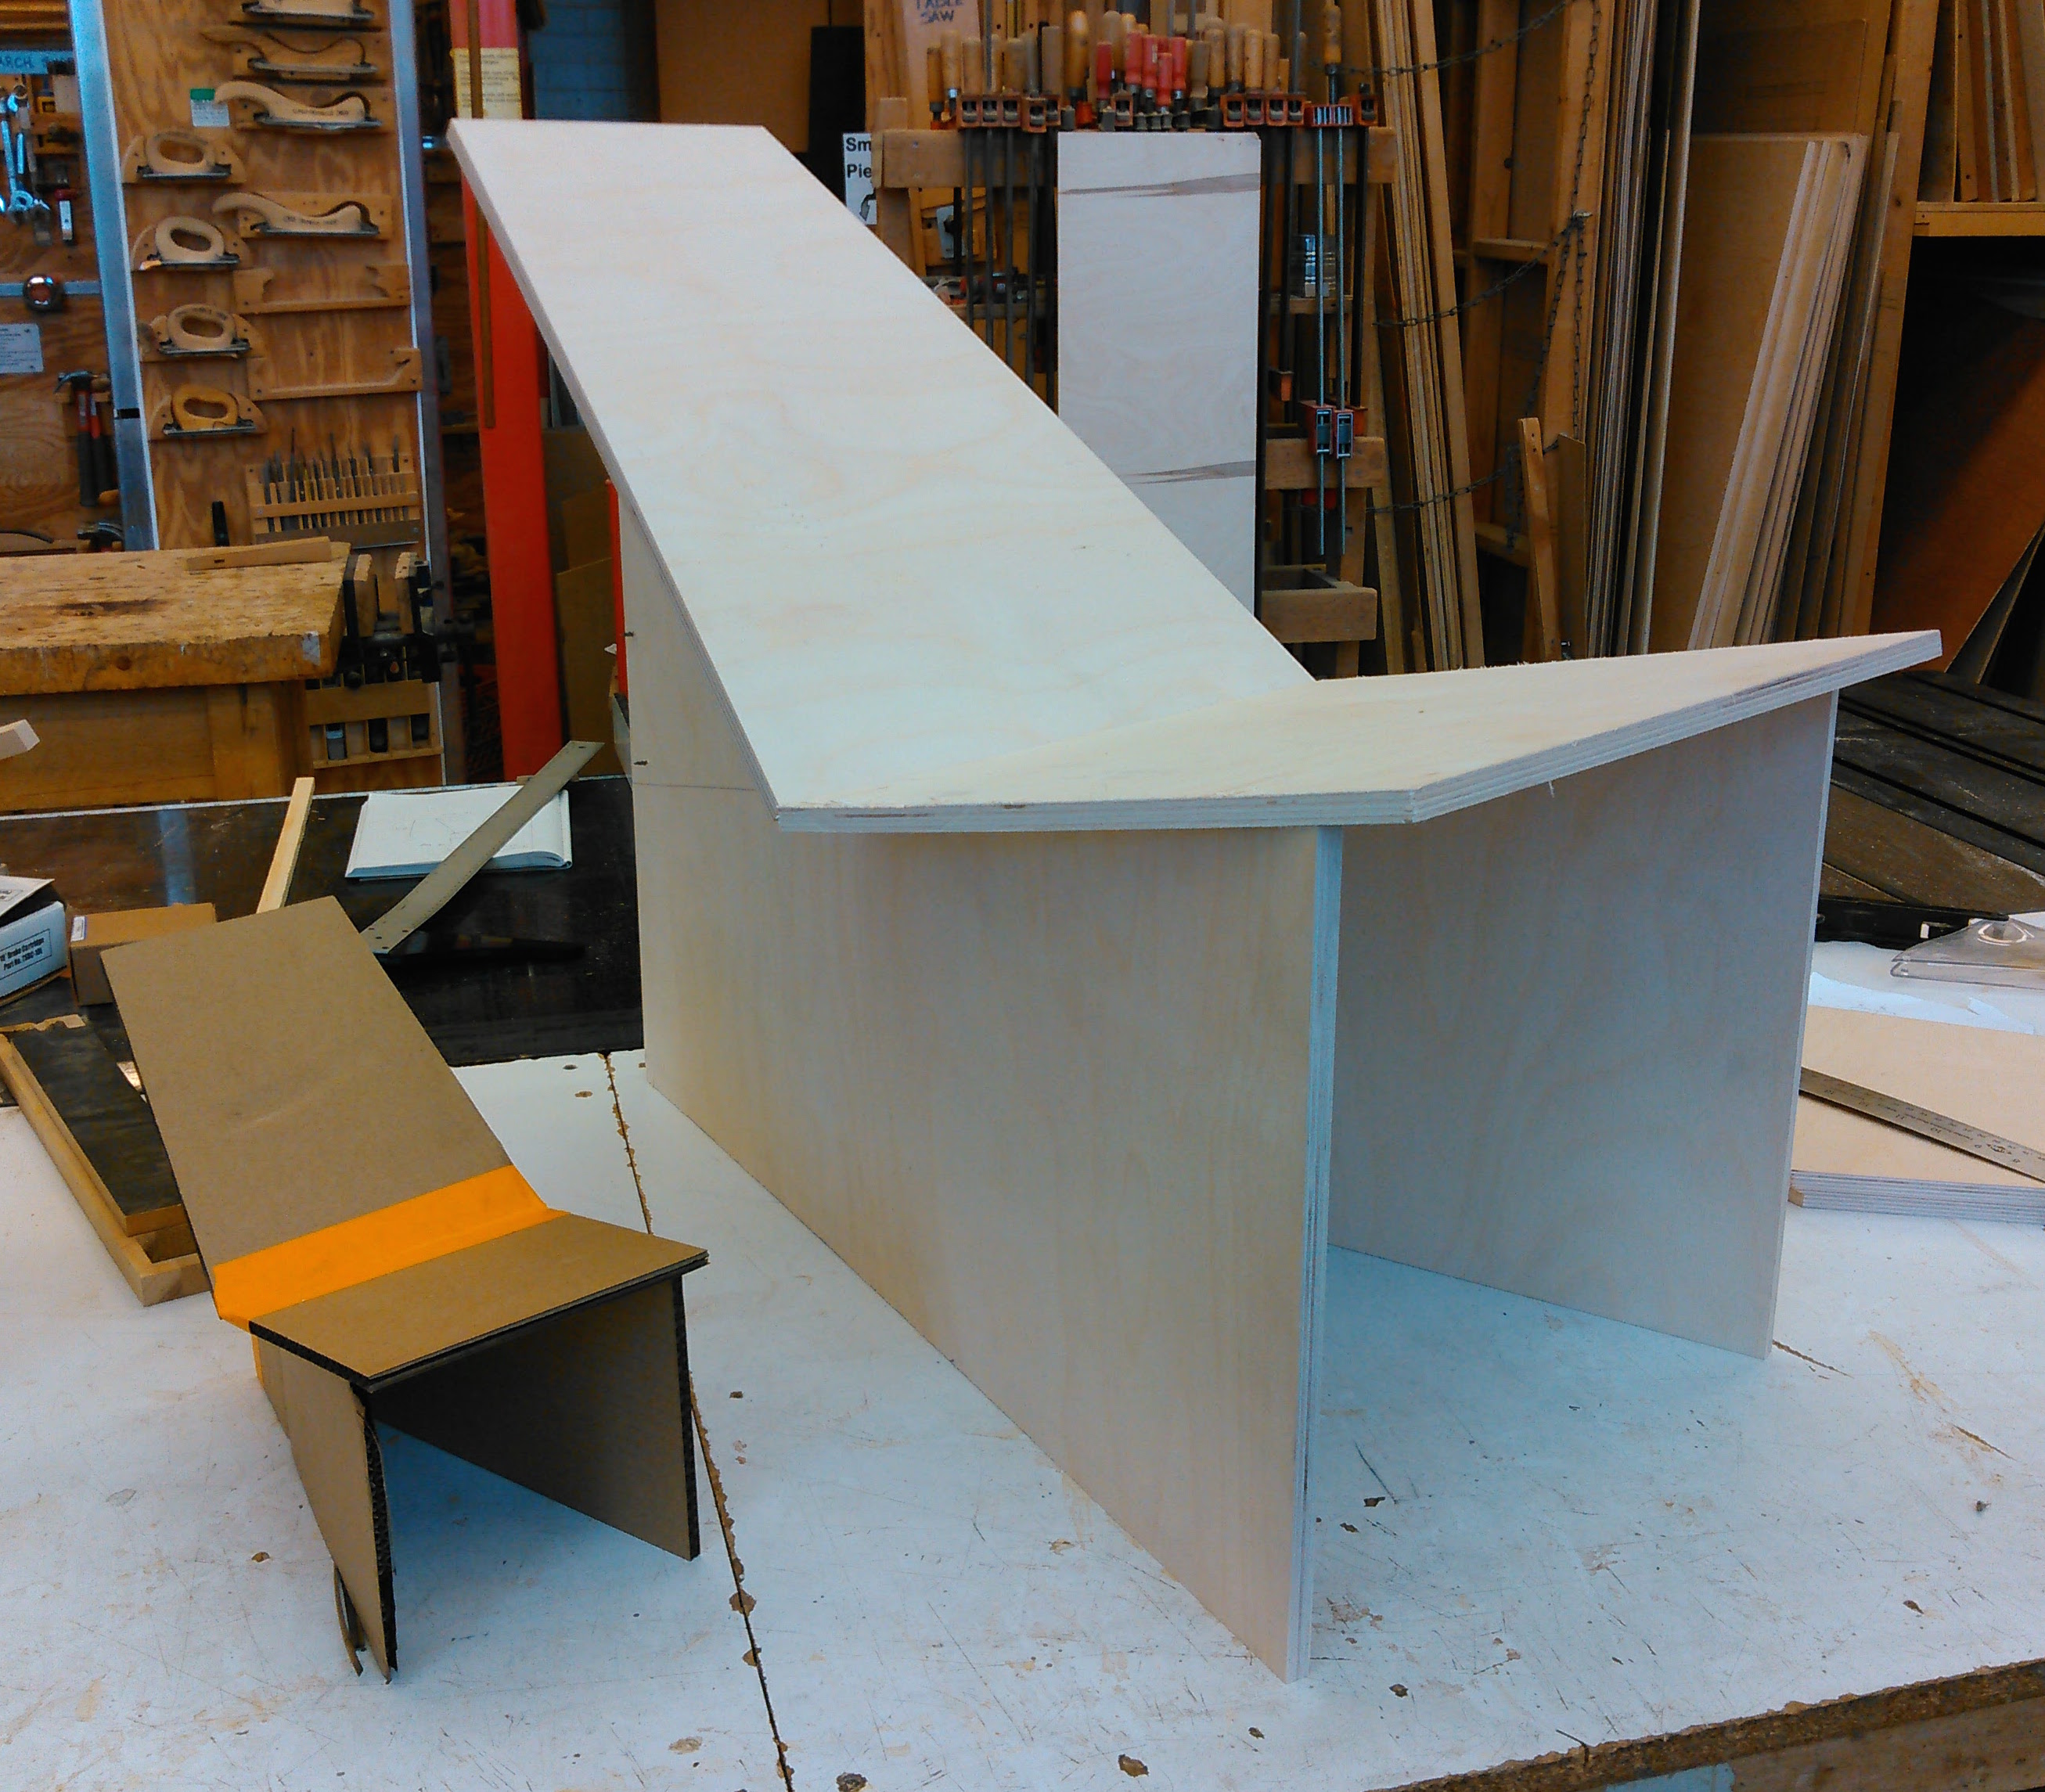 Cardboard scale model and fabricated chair